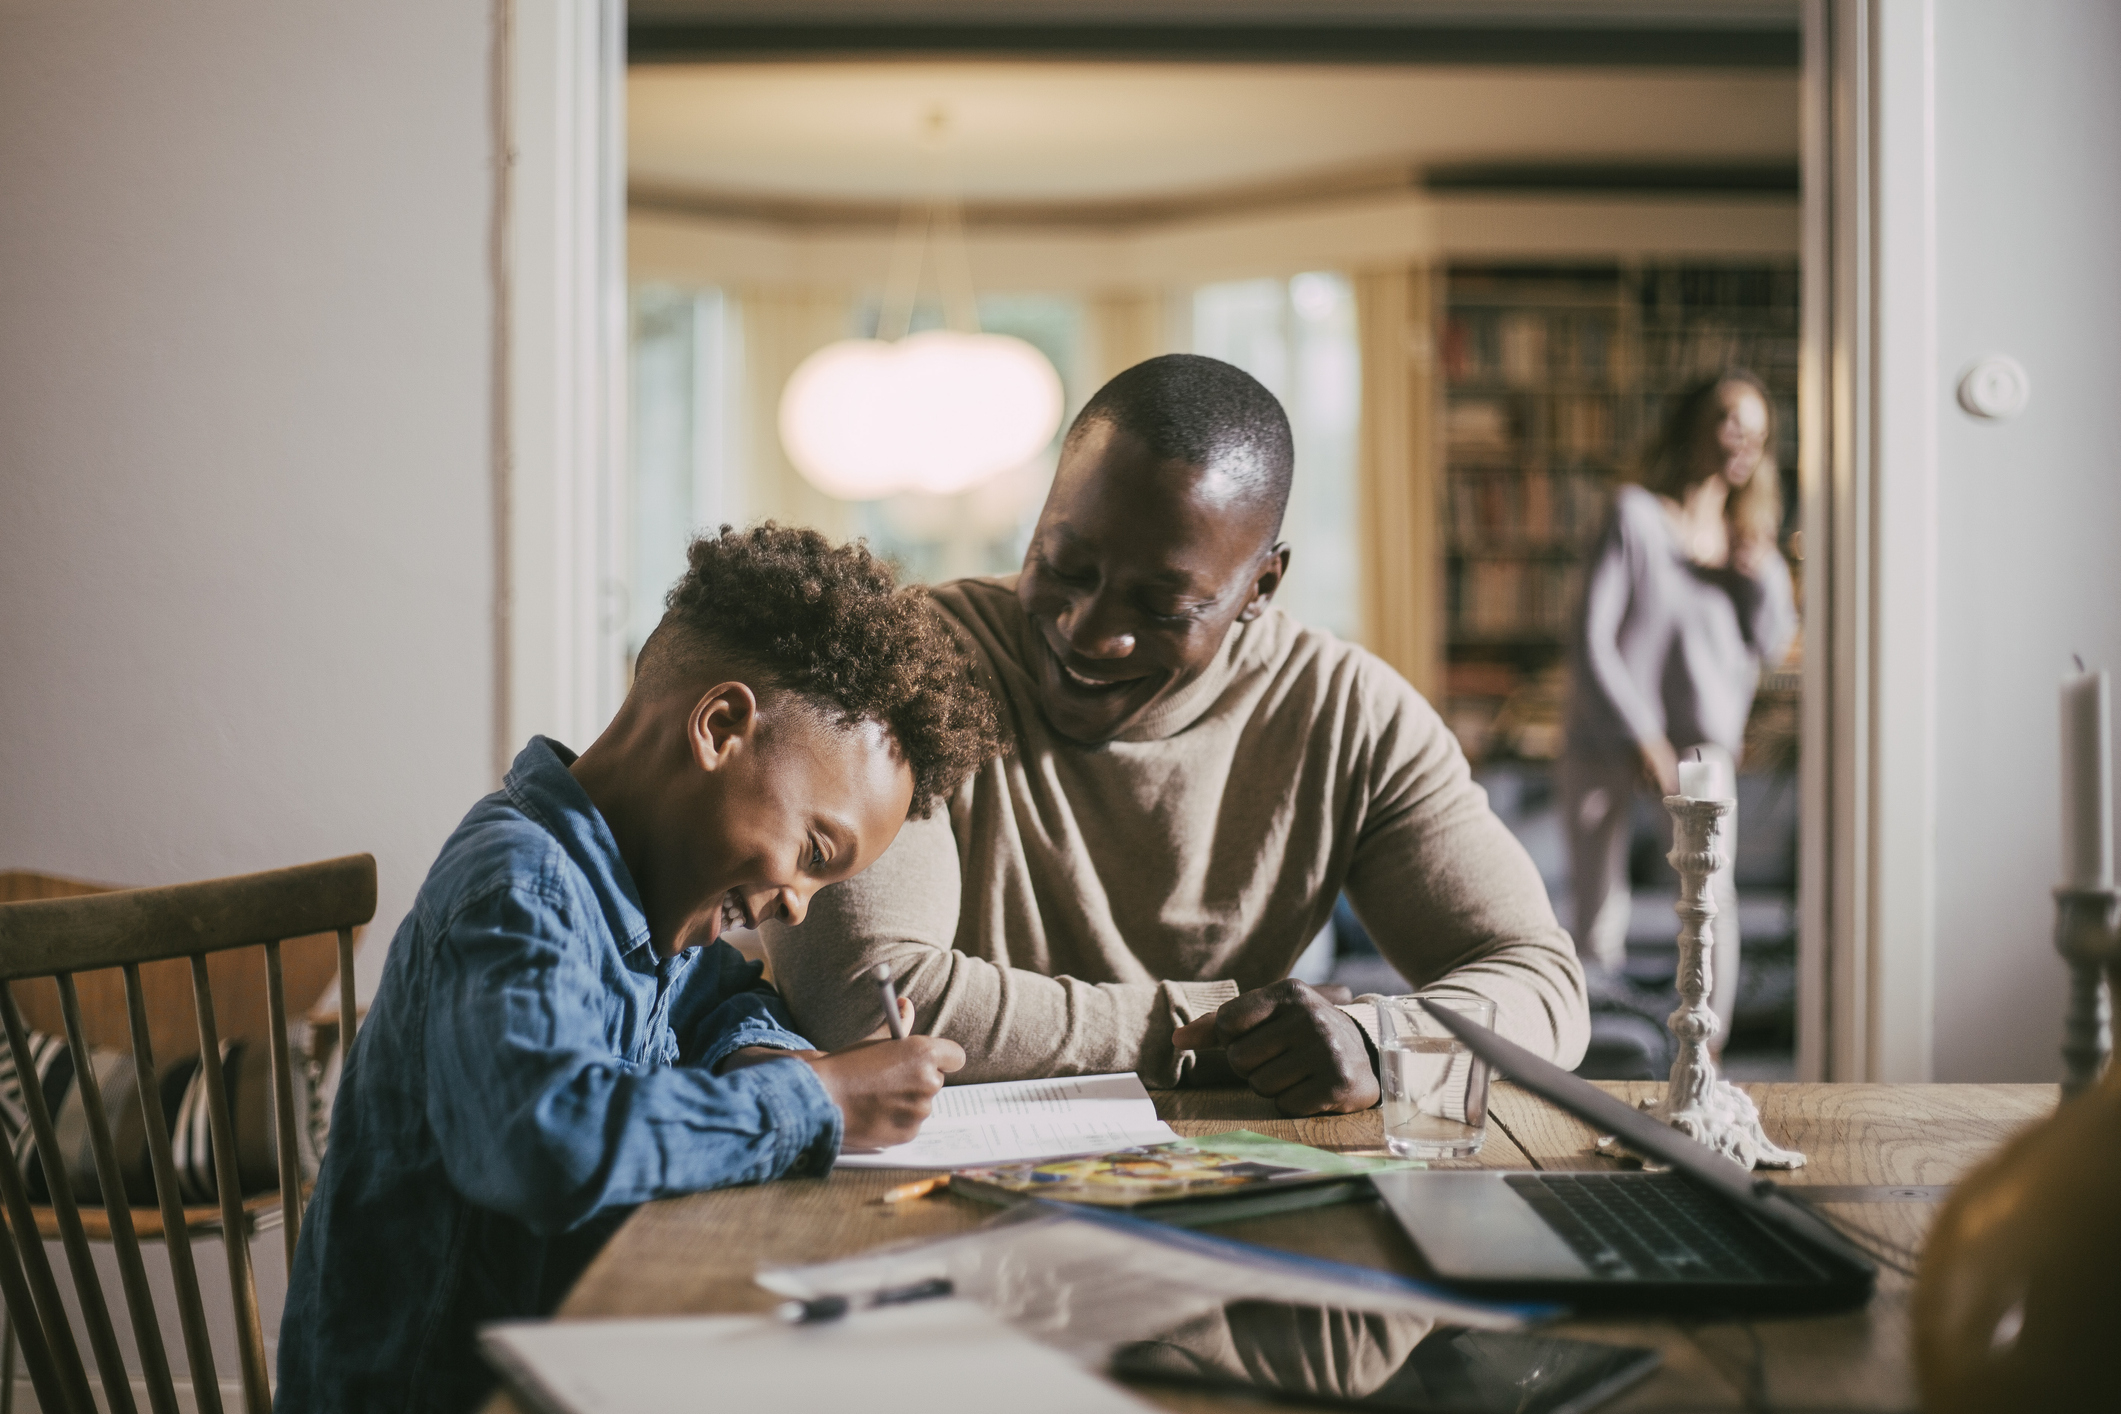 A father helps his child with homework at the dining room table